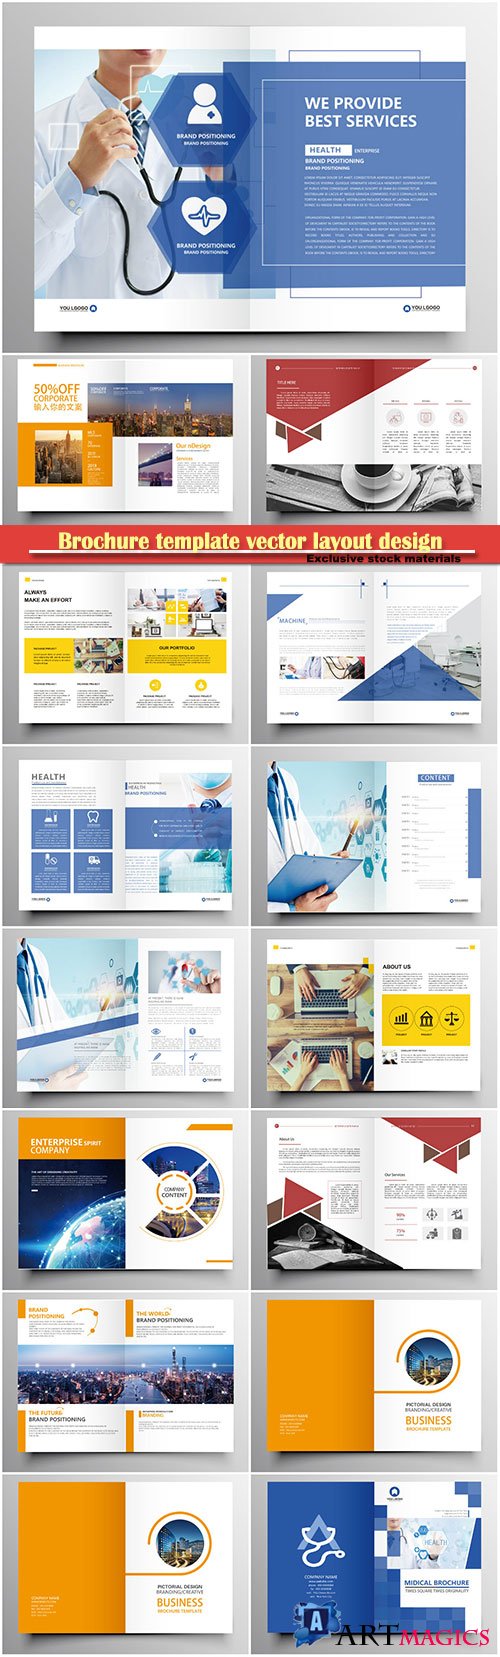 Brochure template vector layout design, corporate business annual report, magazine, flyer mockup # 132